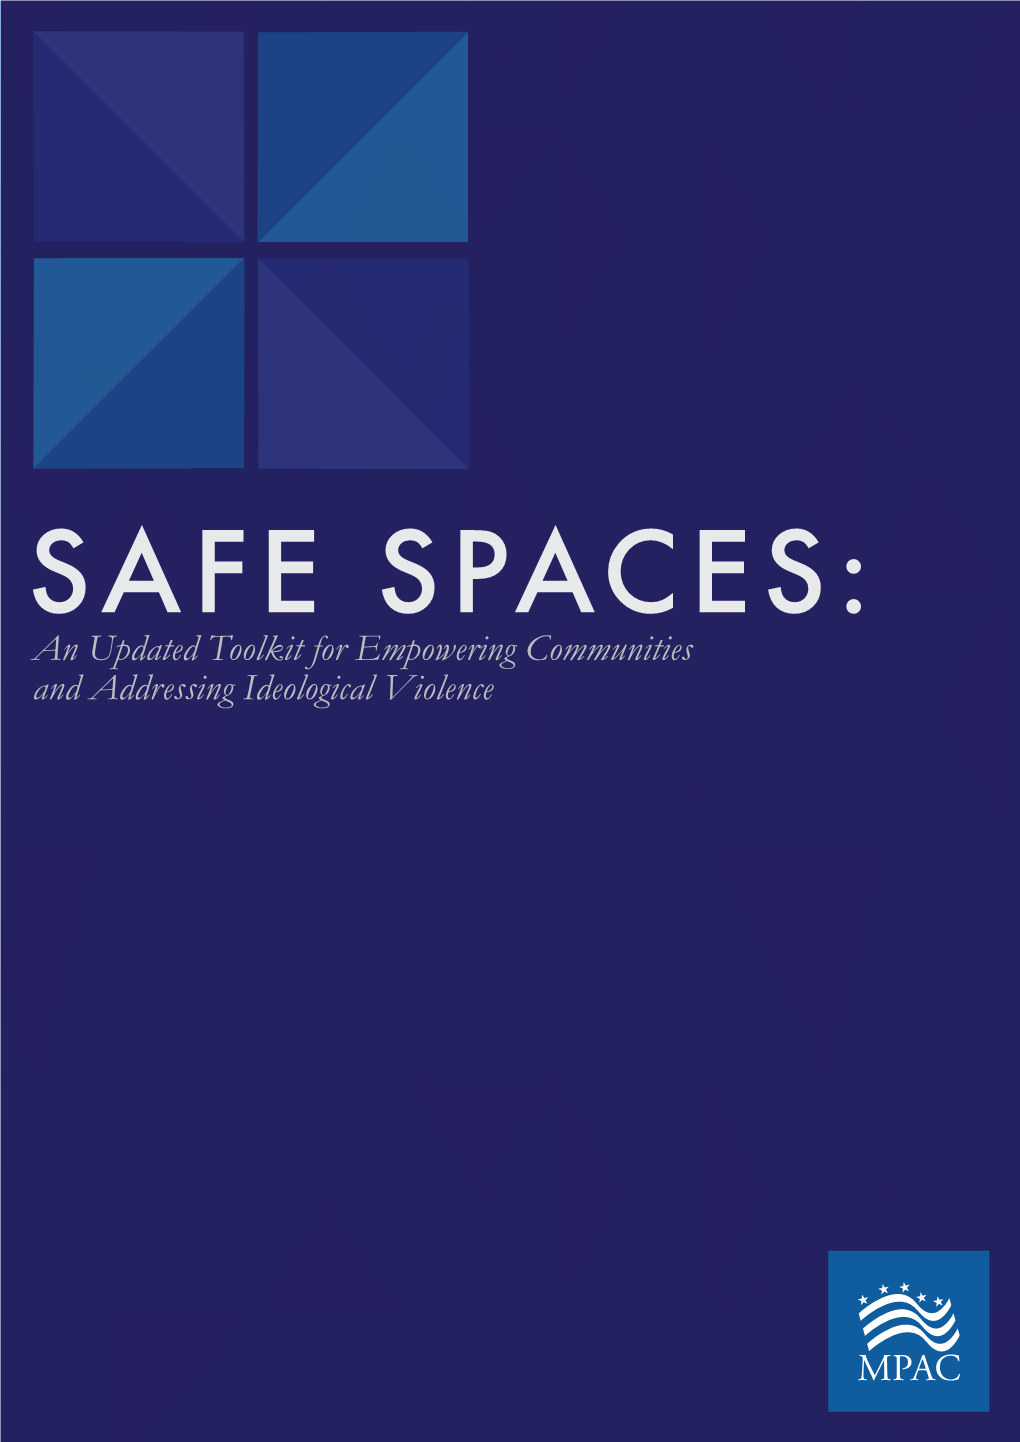 SAFE SPACES: an Updated Toolkit for Empowering Communities and Addressing Ideological Violence CONTENTS